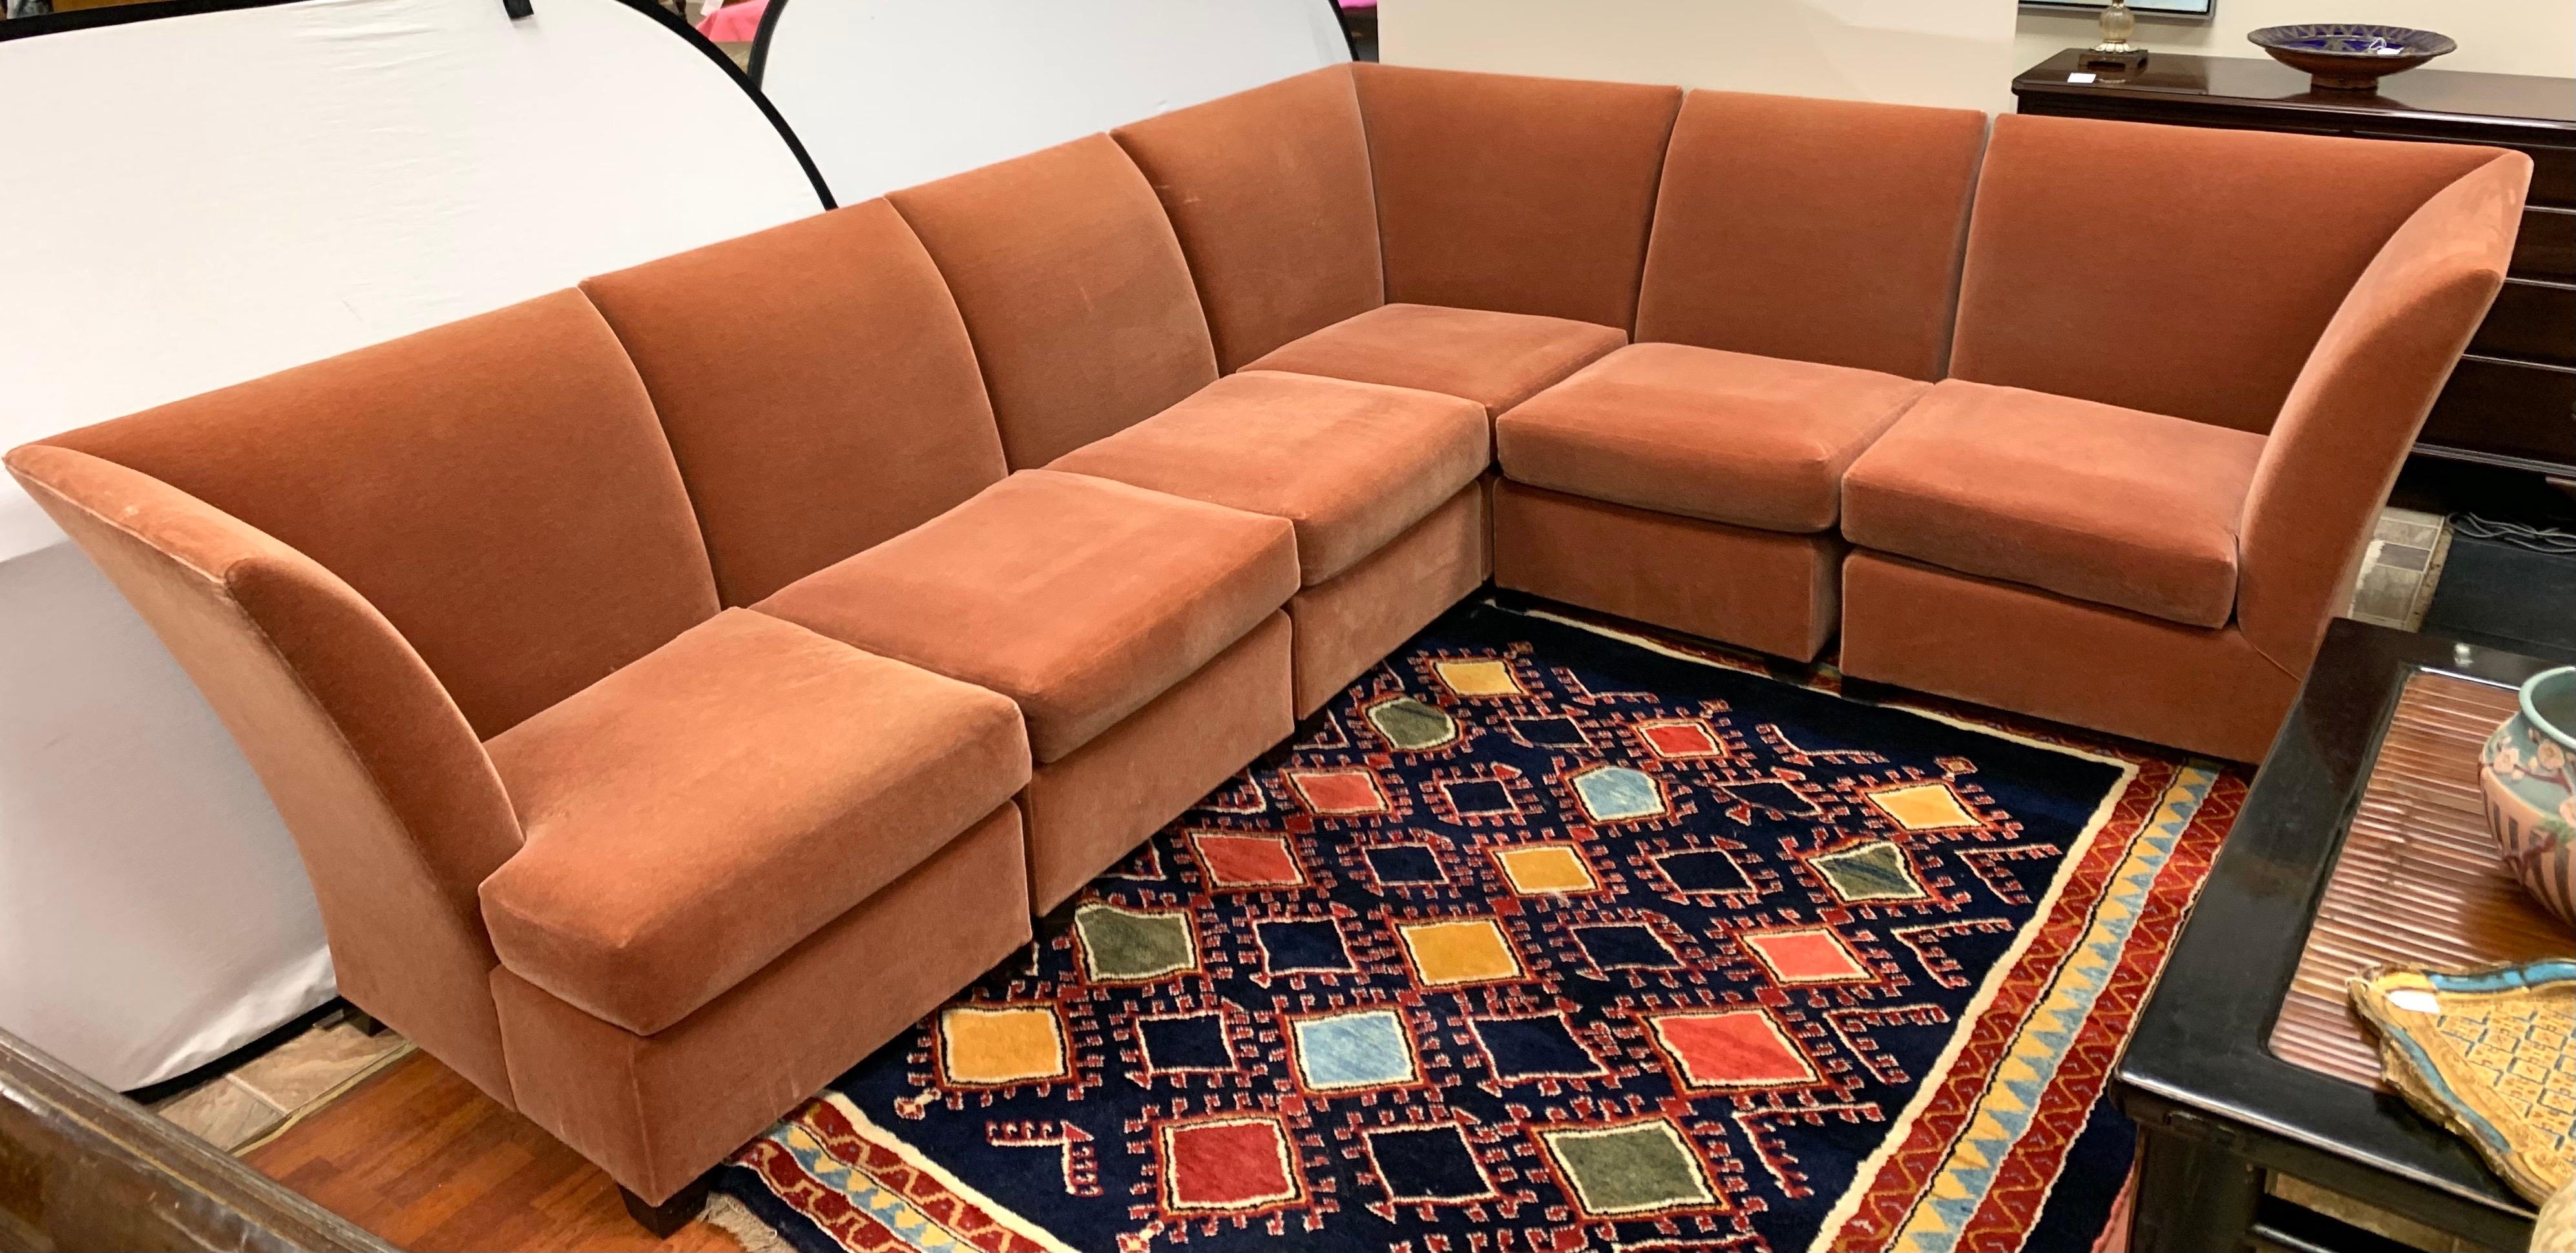 Magnificent Donghia six piece sectional L-shaped modular sofa. The fabric is the coveted Donghia salmon rose mohair and is very luxurious. The sectional is about sever years old and fabric is original and still in good shape but does have some age